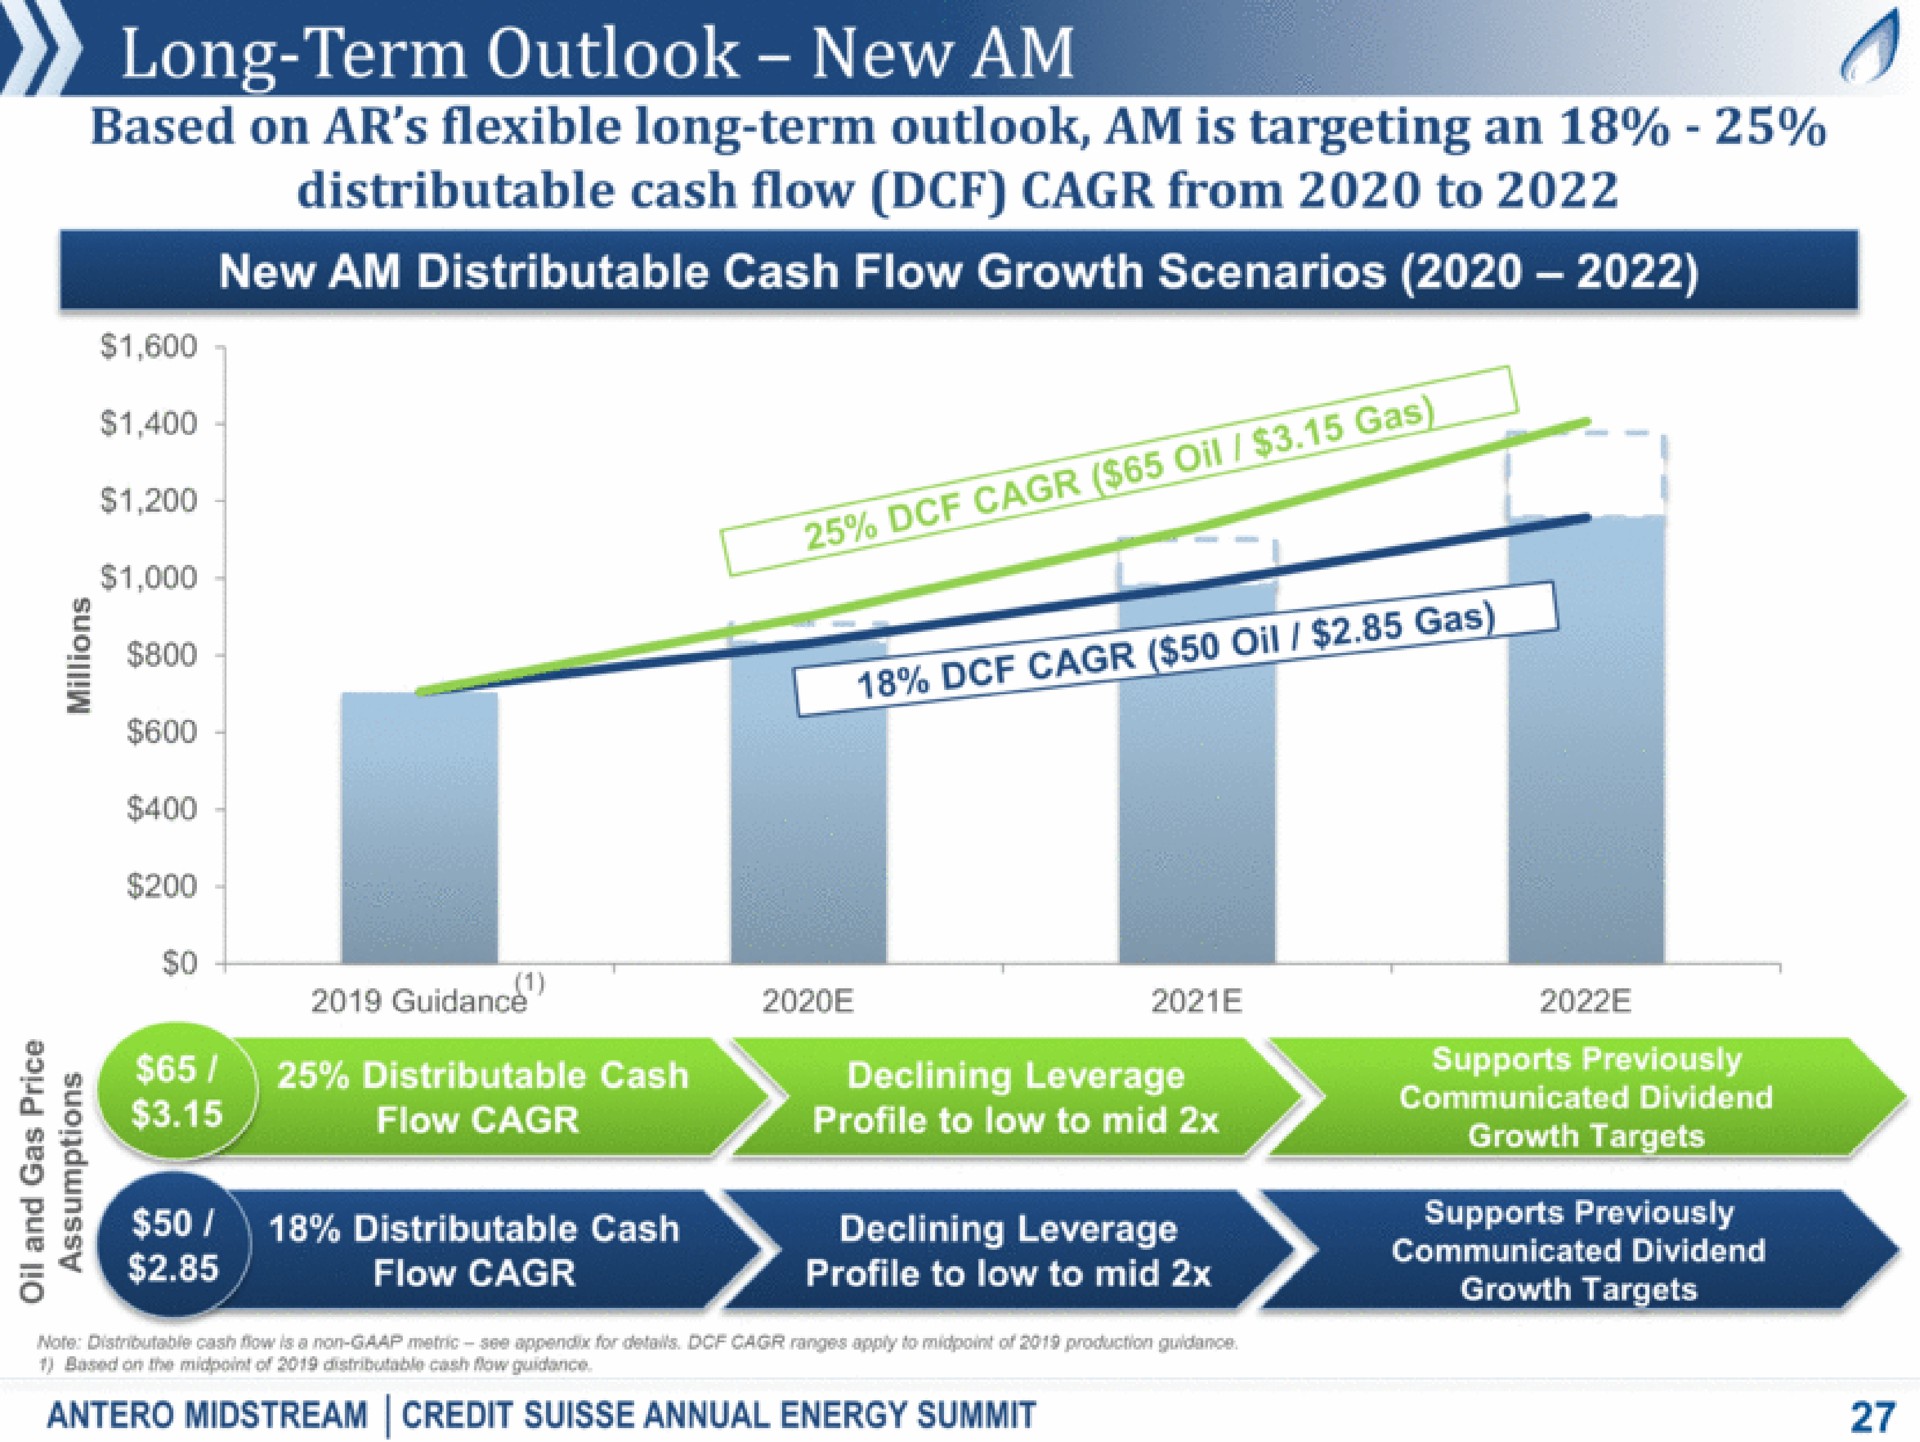 long term outlook new am based on flexible long term outlook am is targeting a an distributable cash flow from to a he as | Antero Midstream Partners